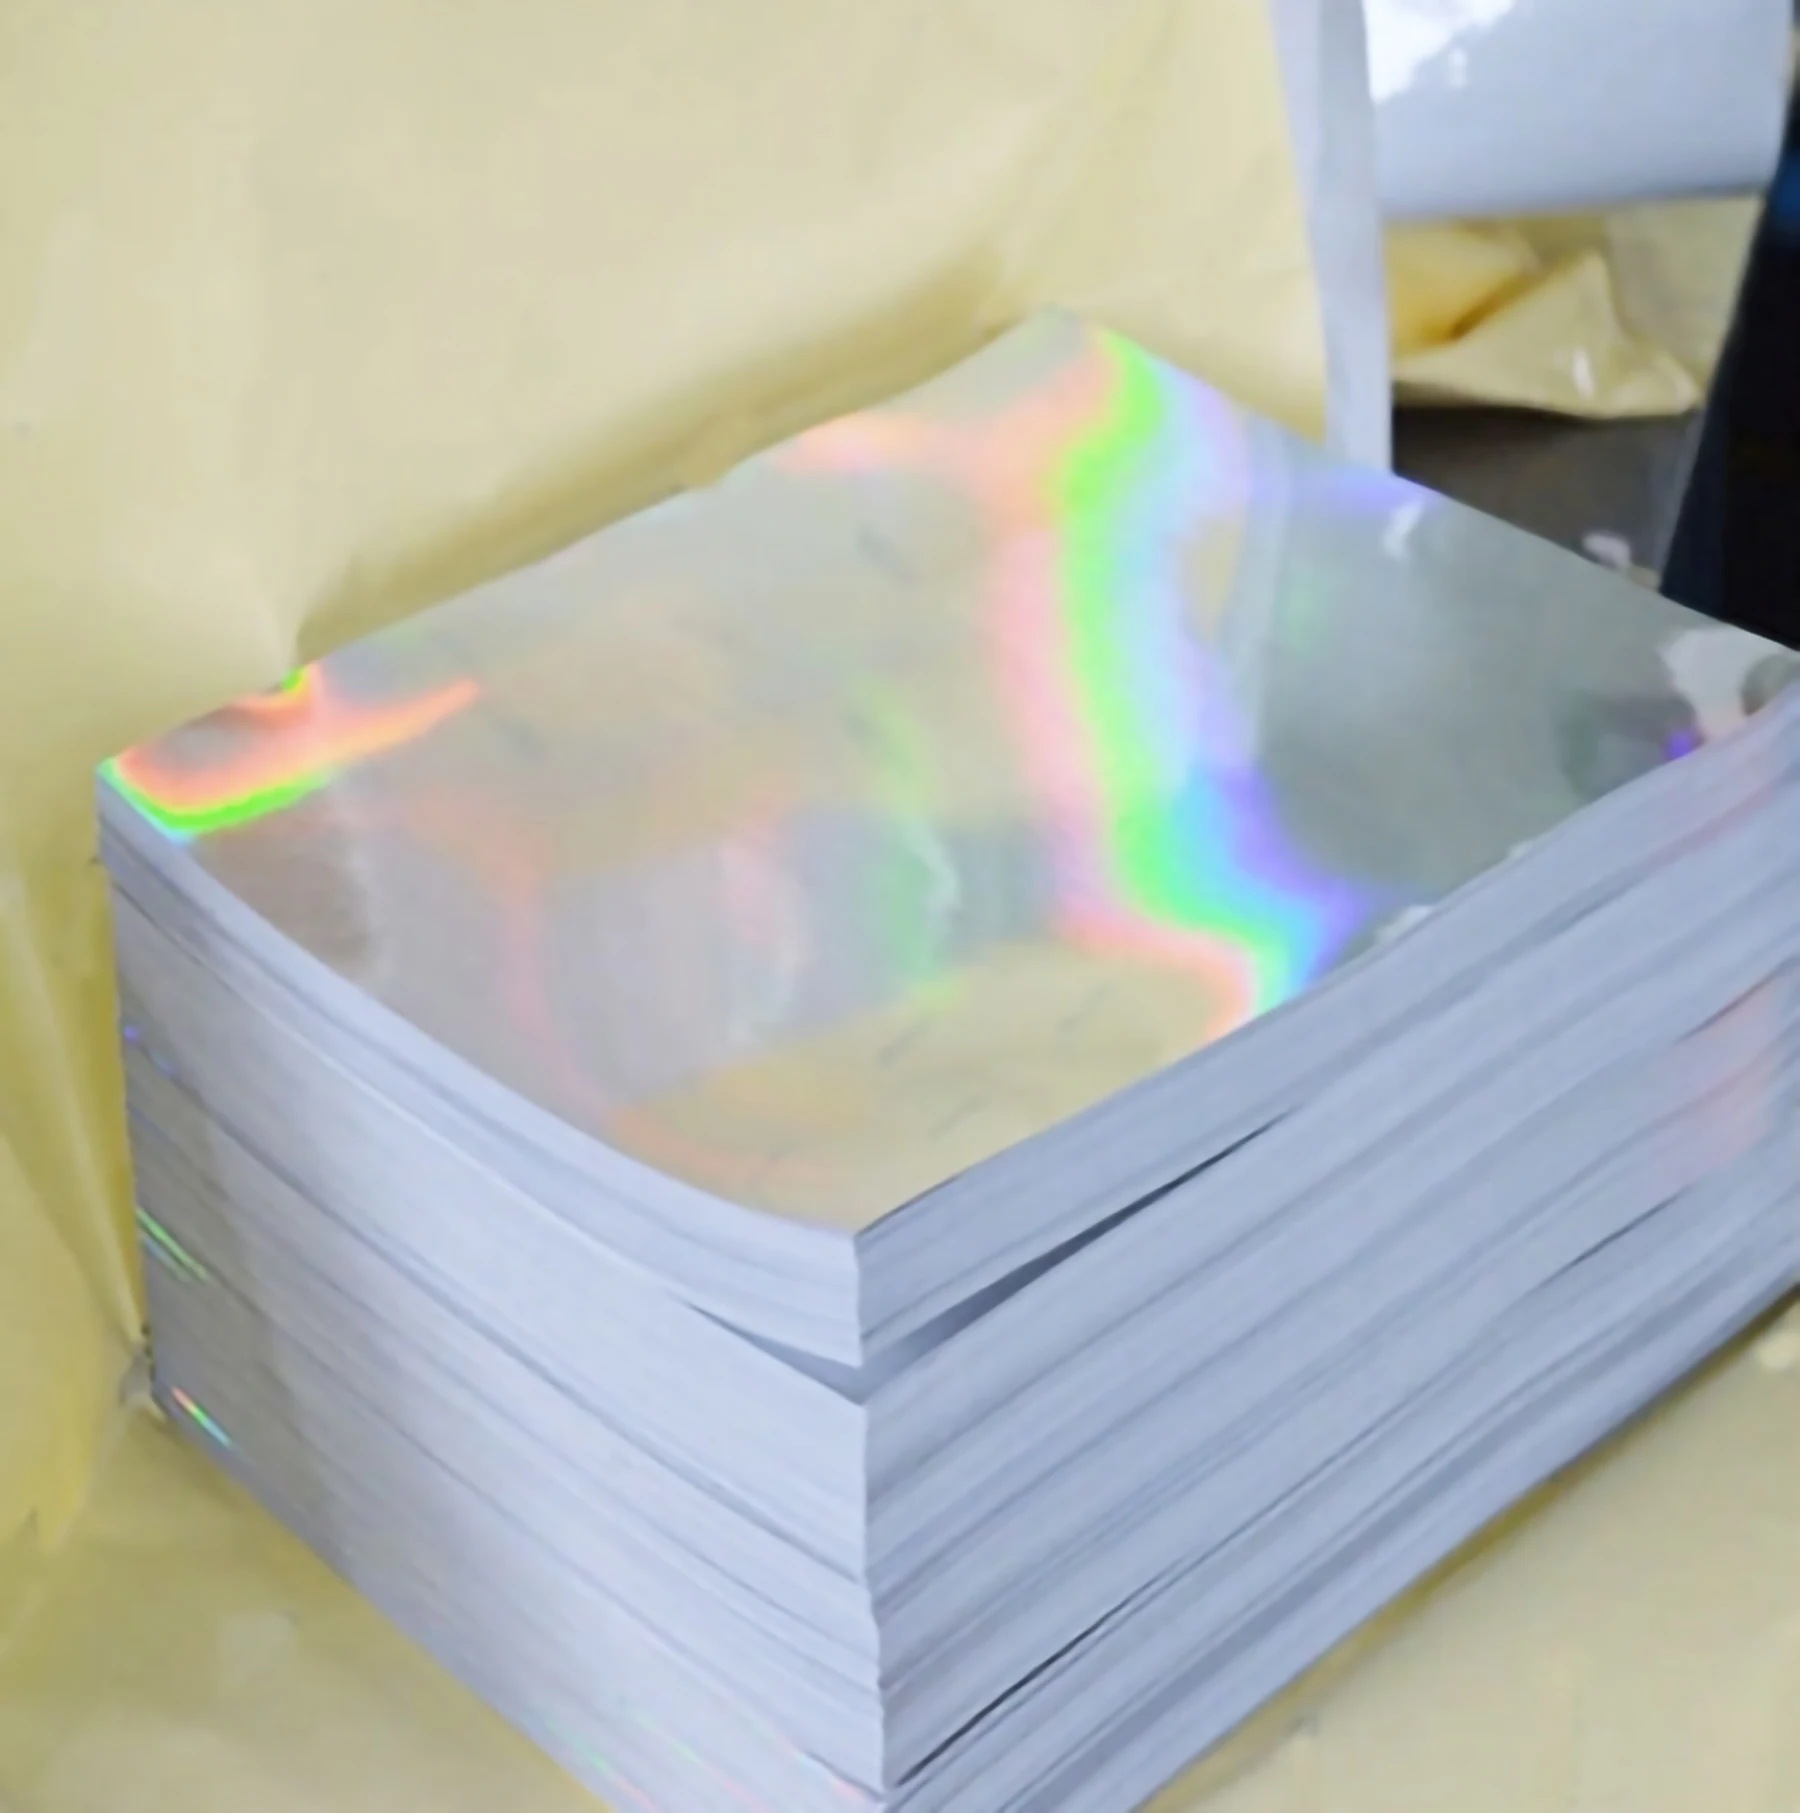 29.7 x 21 cm/ 8.25 x 11.7 Inches JiaUfmi 20 Sheets A4 Holographic Printable Vinyl Sticker Paper Rainbow Vinyl Sticker Paper Waterproof Sticker Paper for Inkjet and Printer